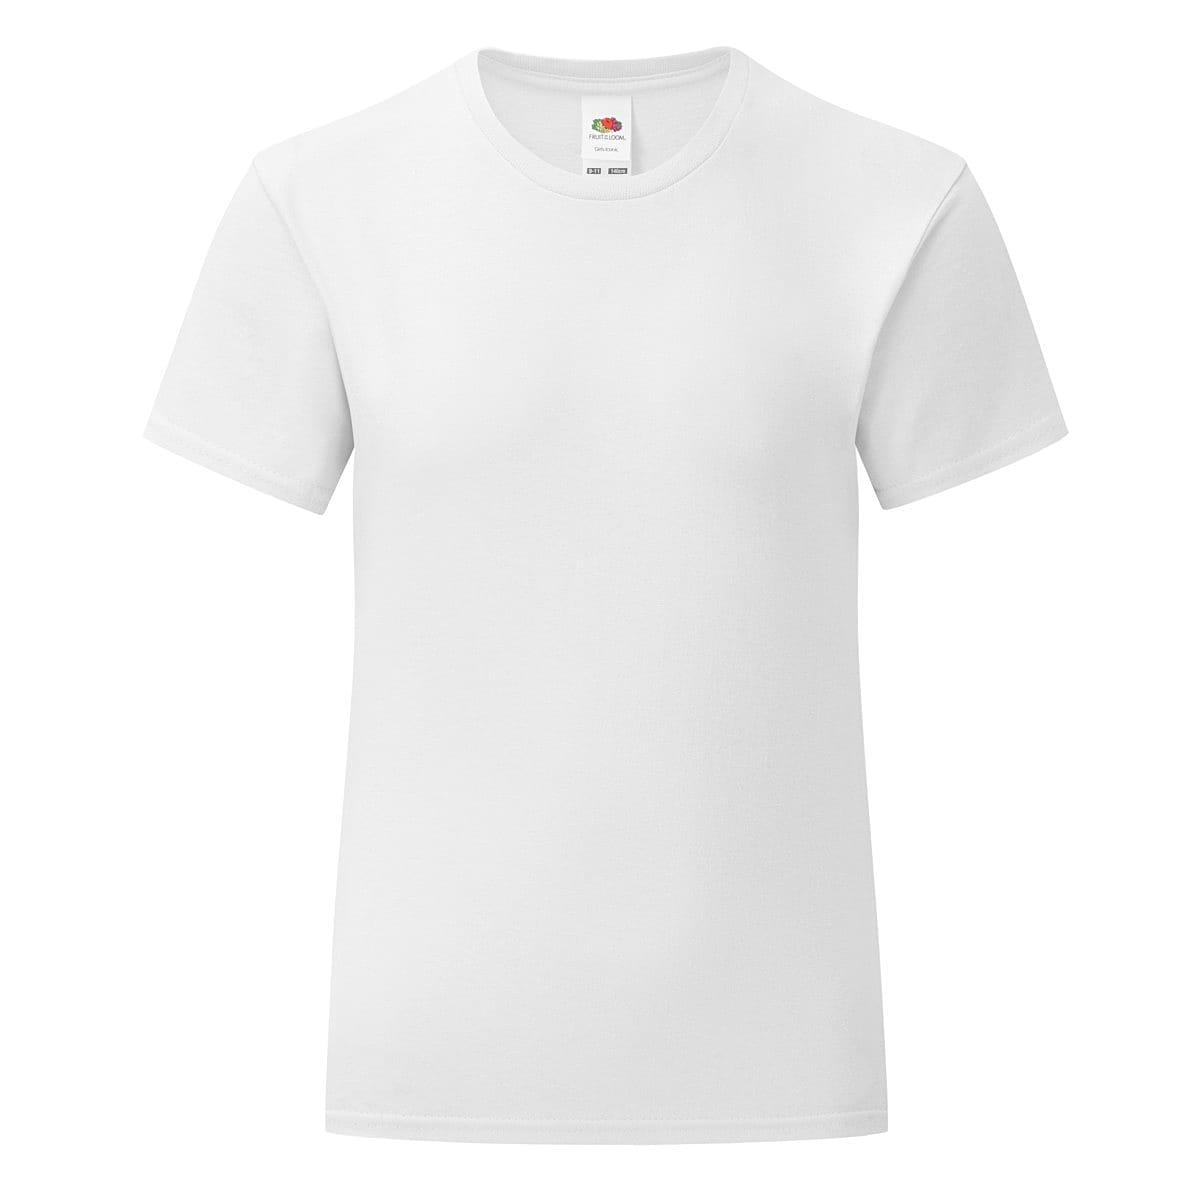 Fruit Of The Loom Girls Iconic T-Shirt in White (Product Code: 61025)